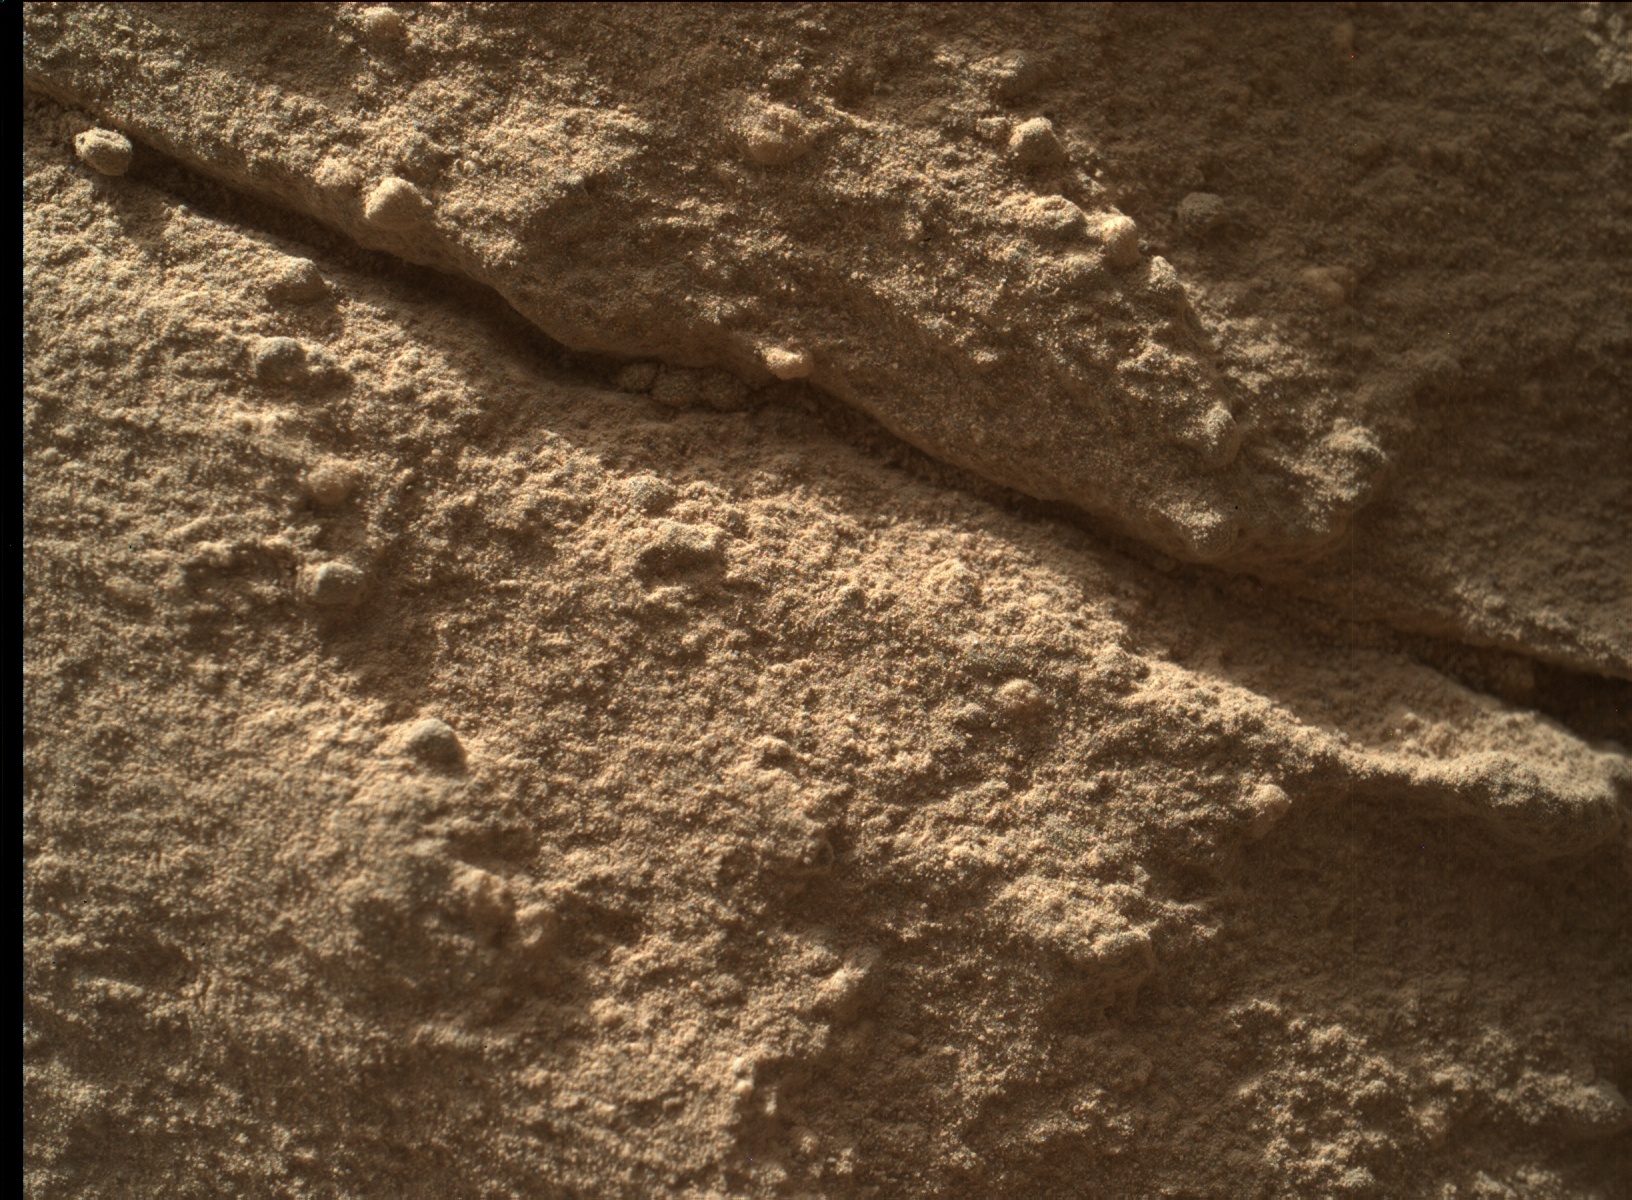 Nasa's Mars rover Curiosity acquired this image using its Mars Hand Lens Imager (MAHLI) on Sol 1300